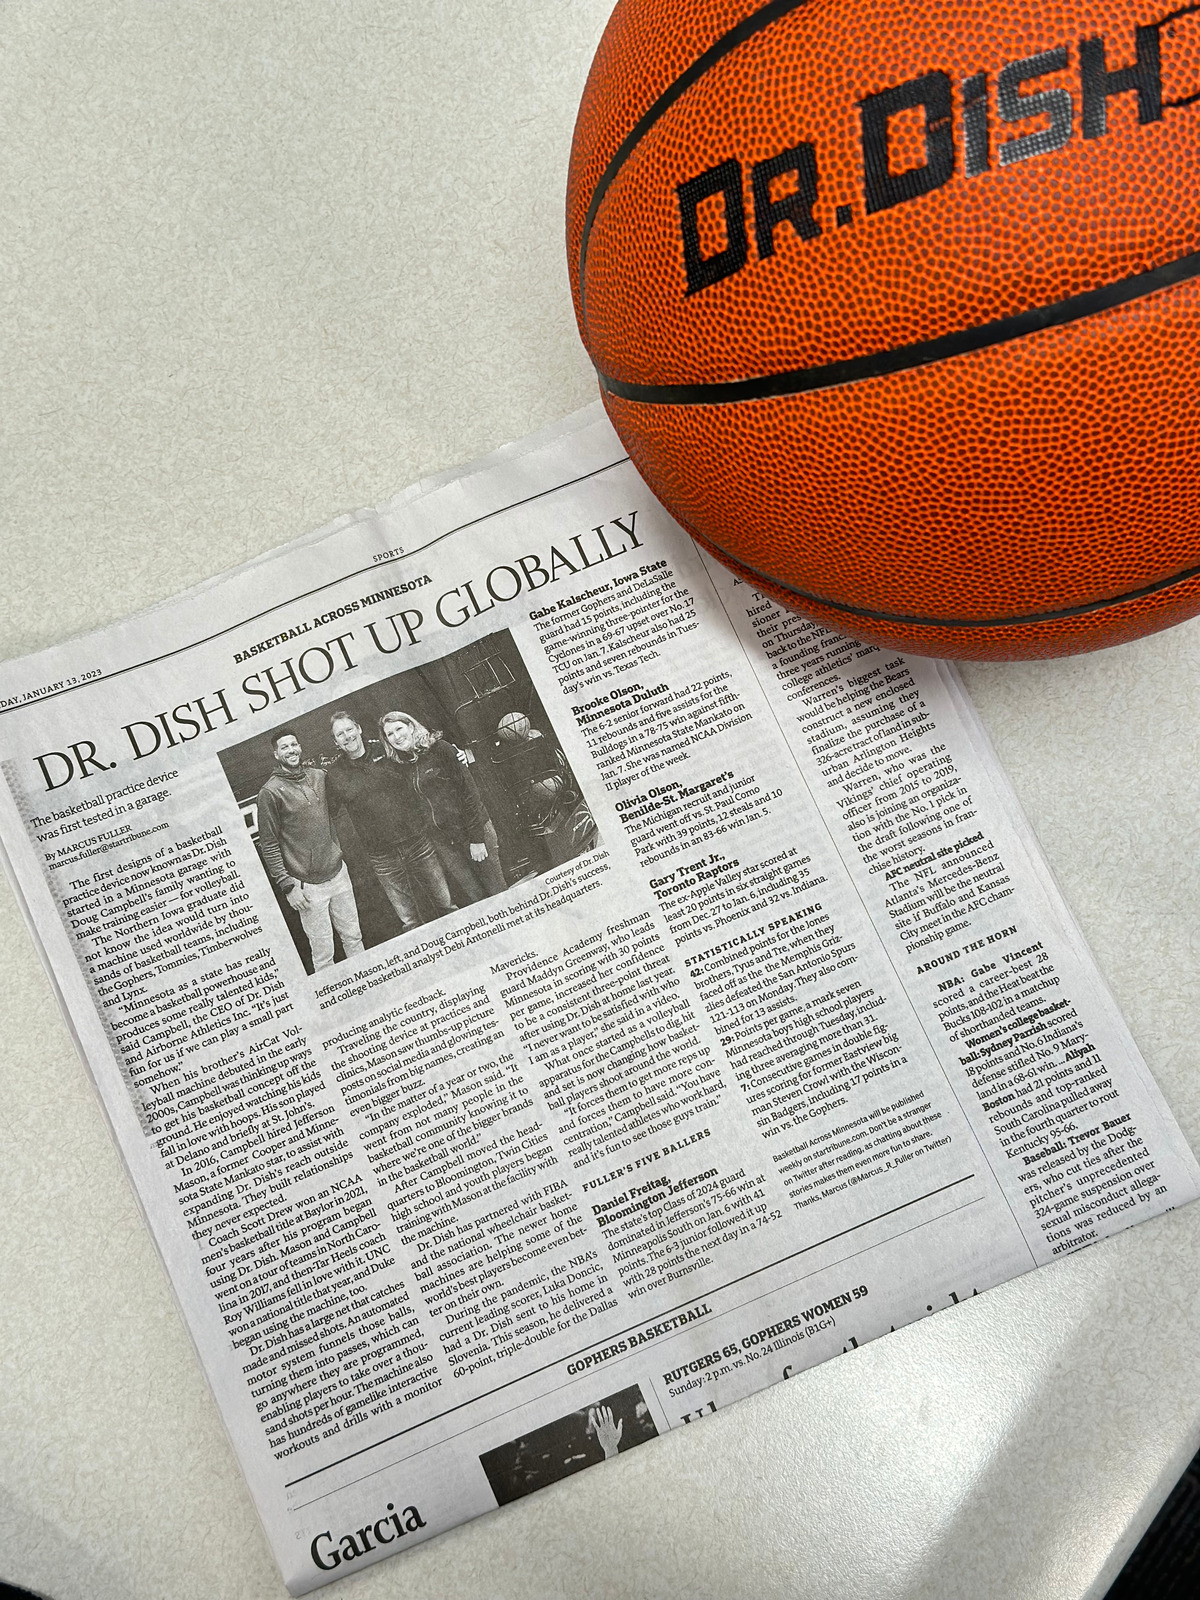 Dr. Dish Basketball Featured in the Minnesota Star Tribune